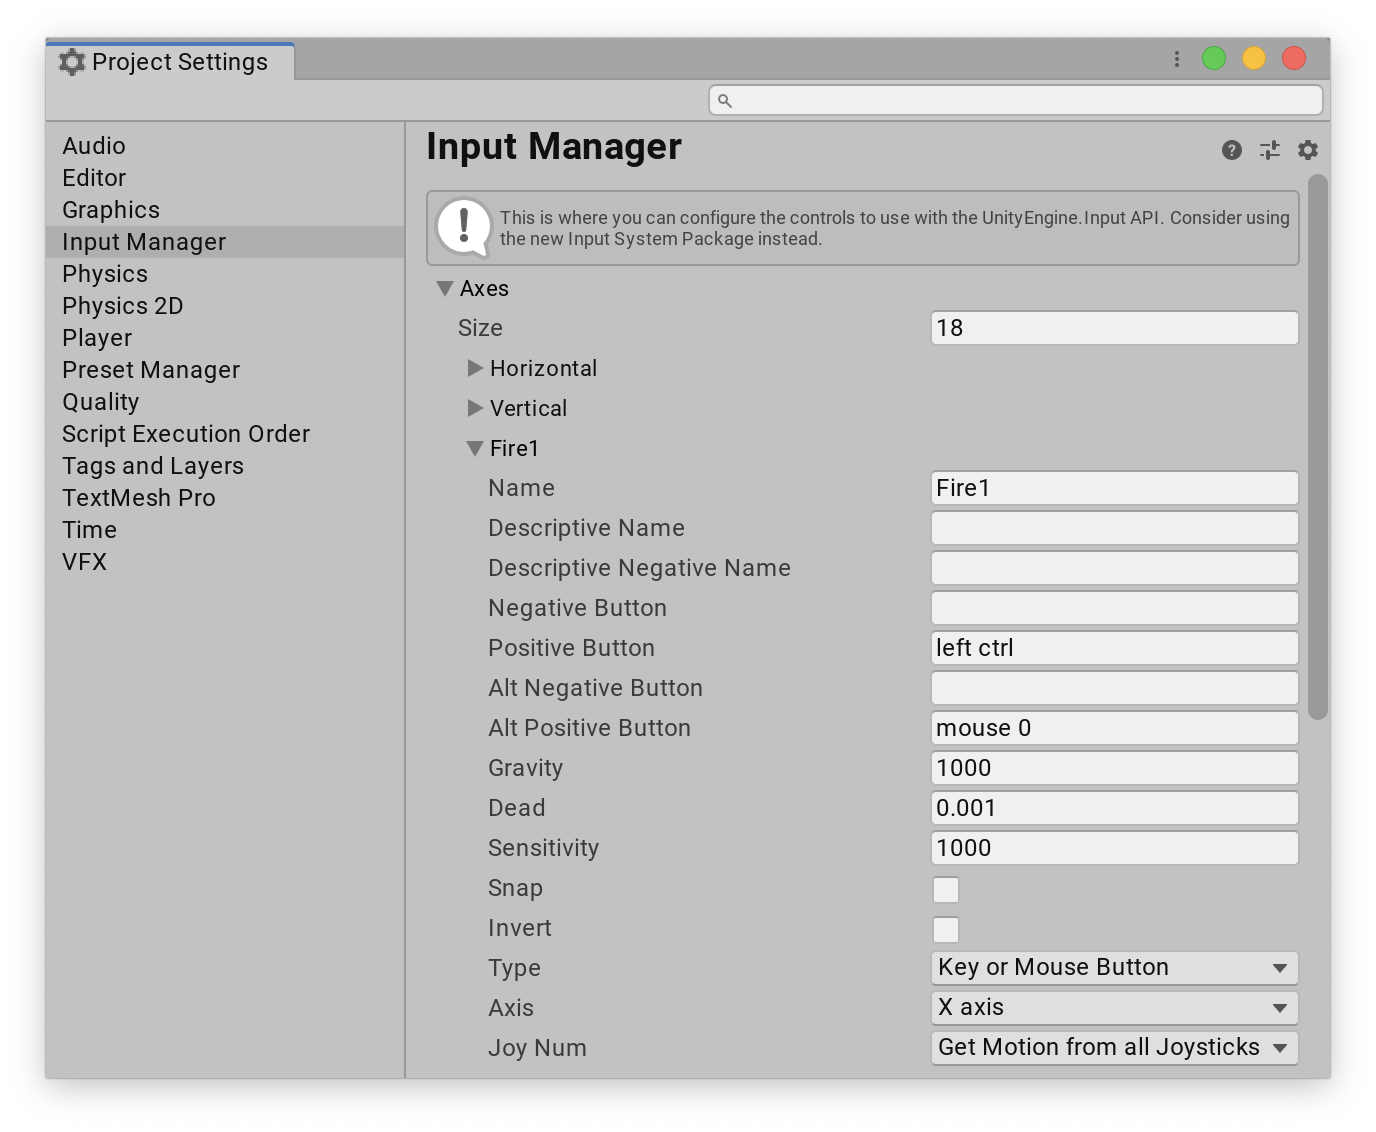 Fire1 Action in Old Input Manager